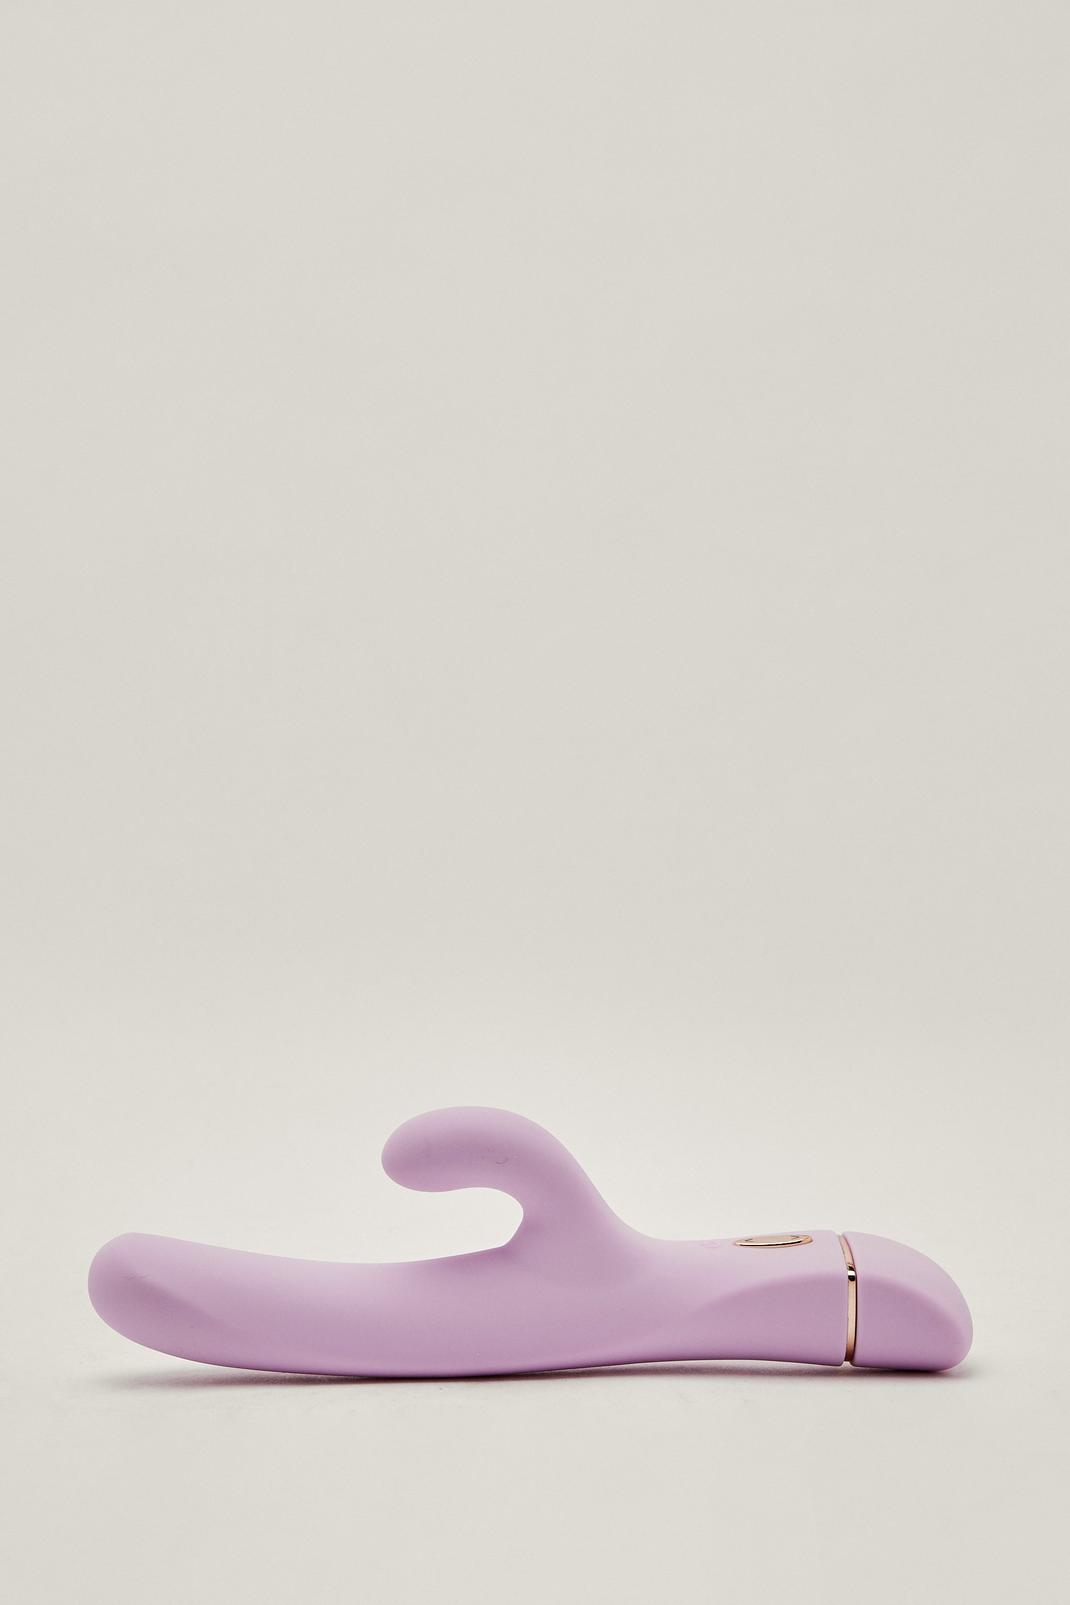 Lilac Silicone Rabbit G-Spot Vibrator image number 1